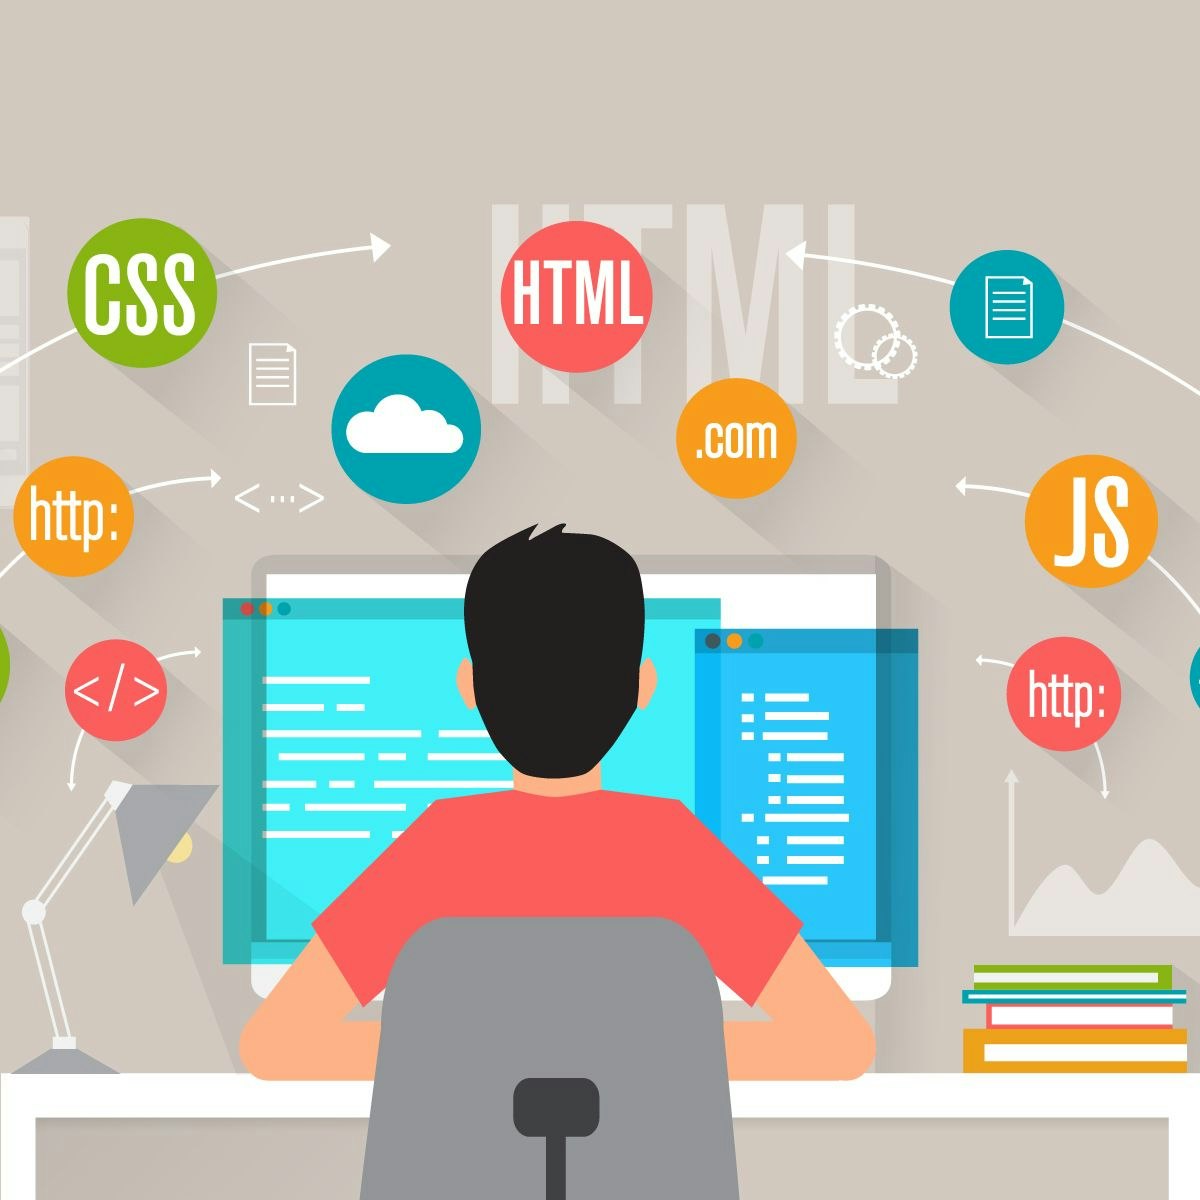 html and javascript compiler online